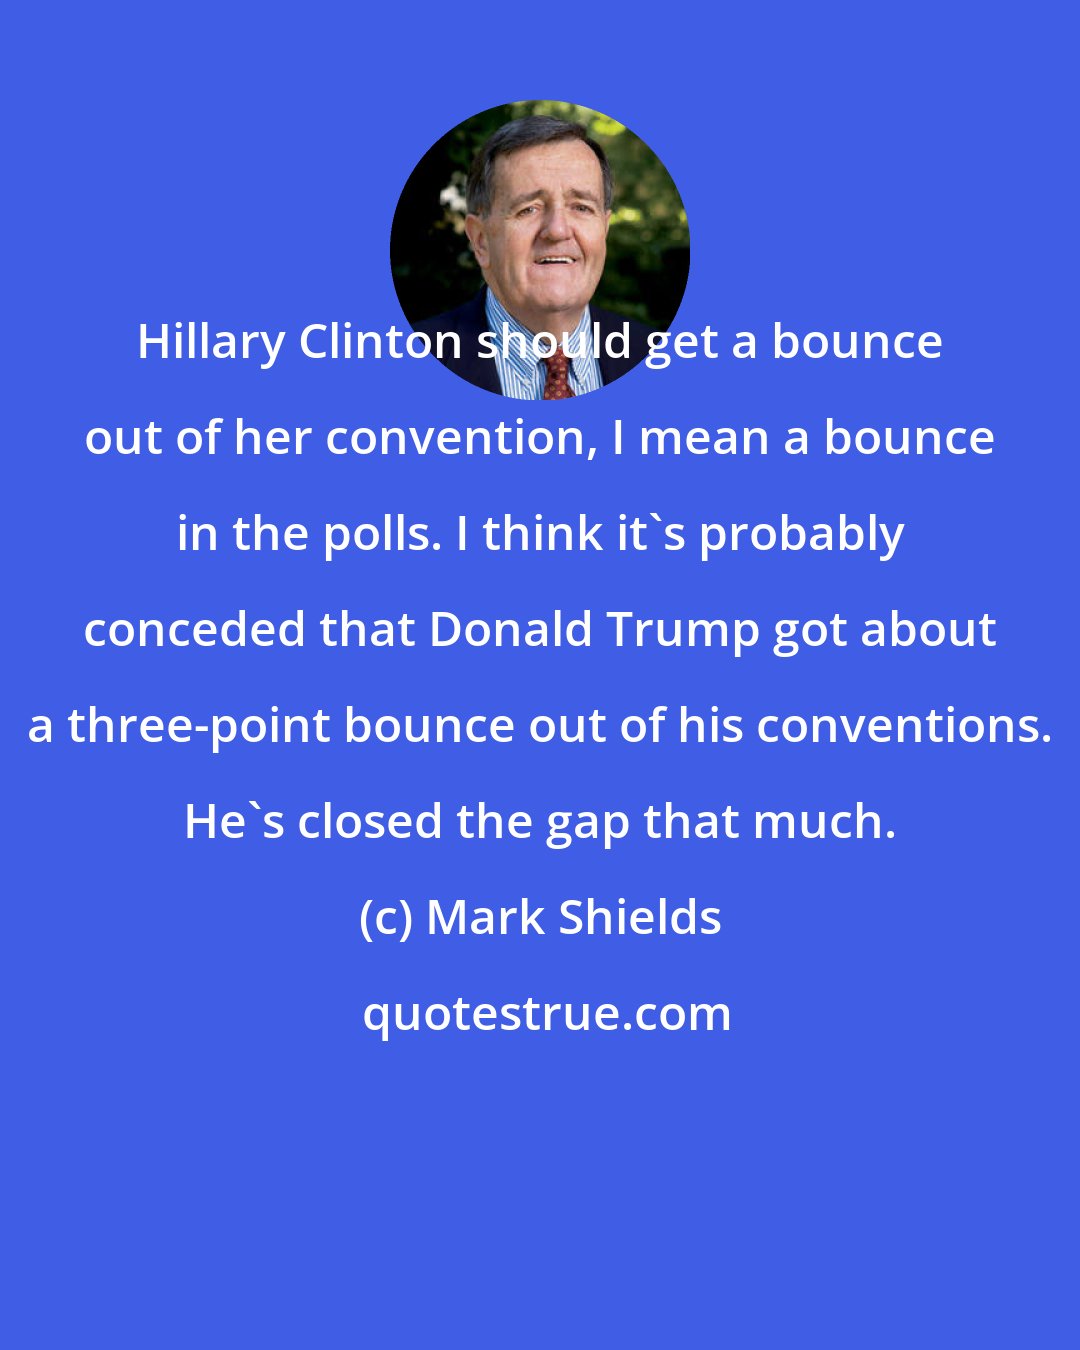 Mark Shields: Hillary Clinton should get a bounce out of her convention, I mean a bounce in the polls. I think it's probably conceded that Donald Trump got about a three-point bounce out of his conventions. He's closed the gap that much.